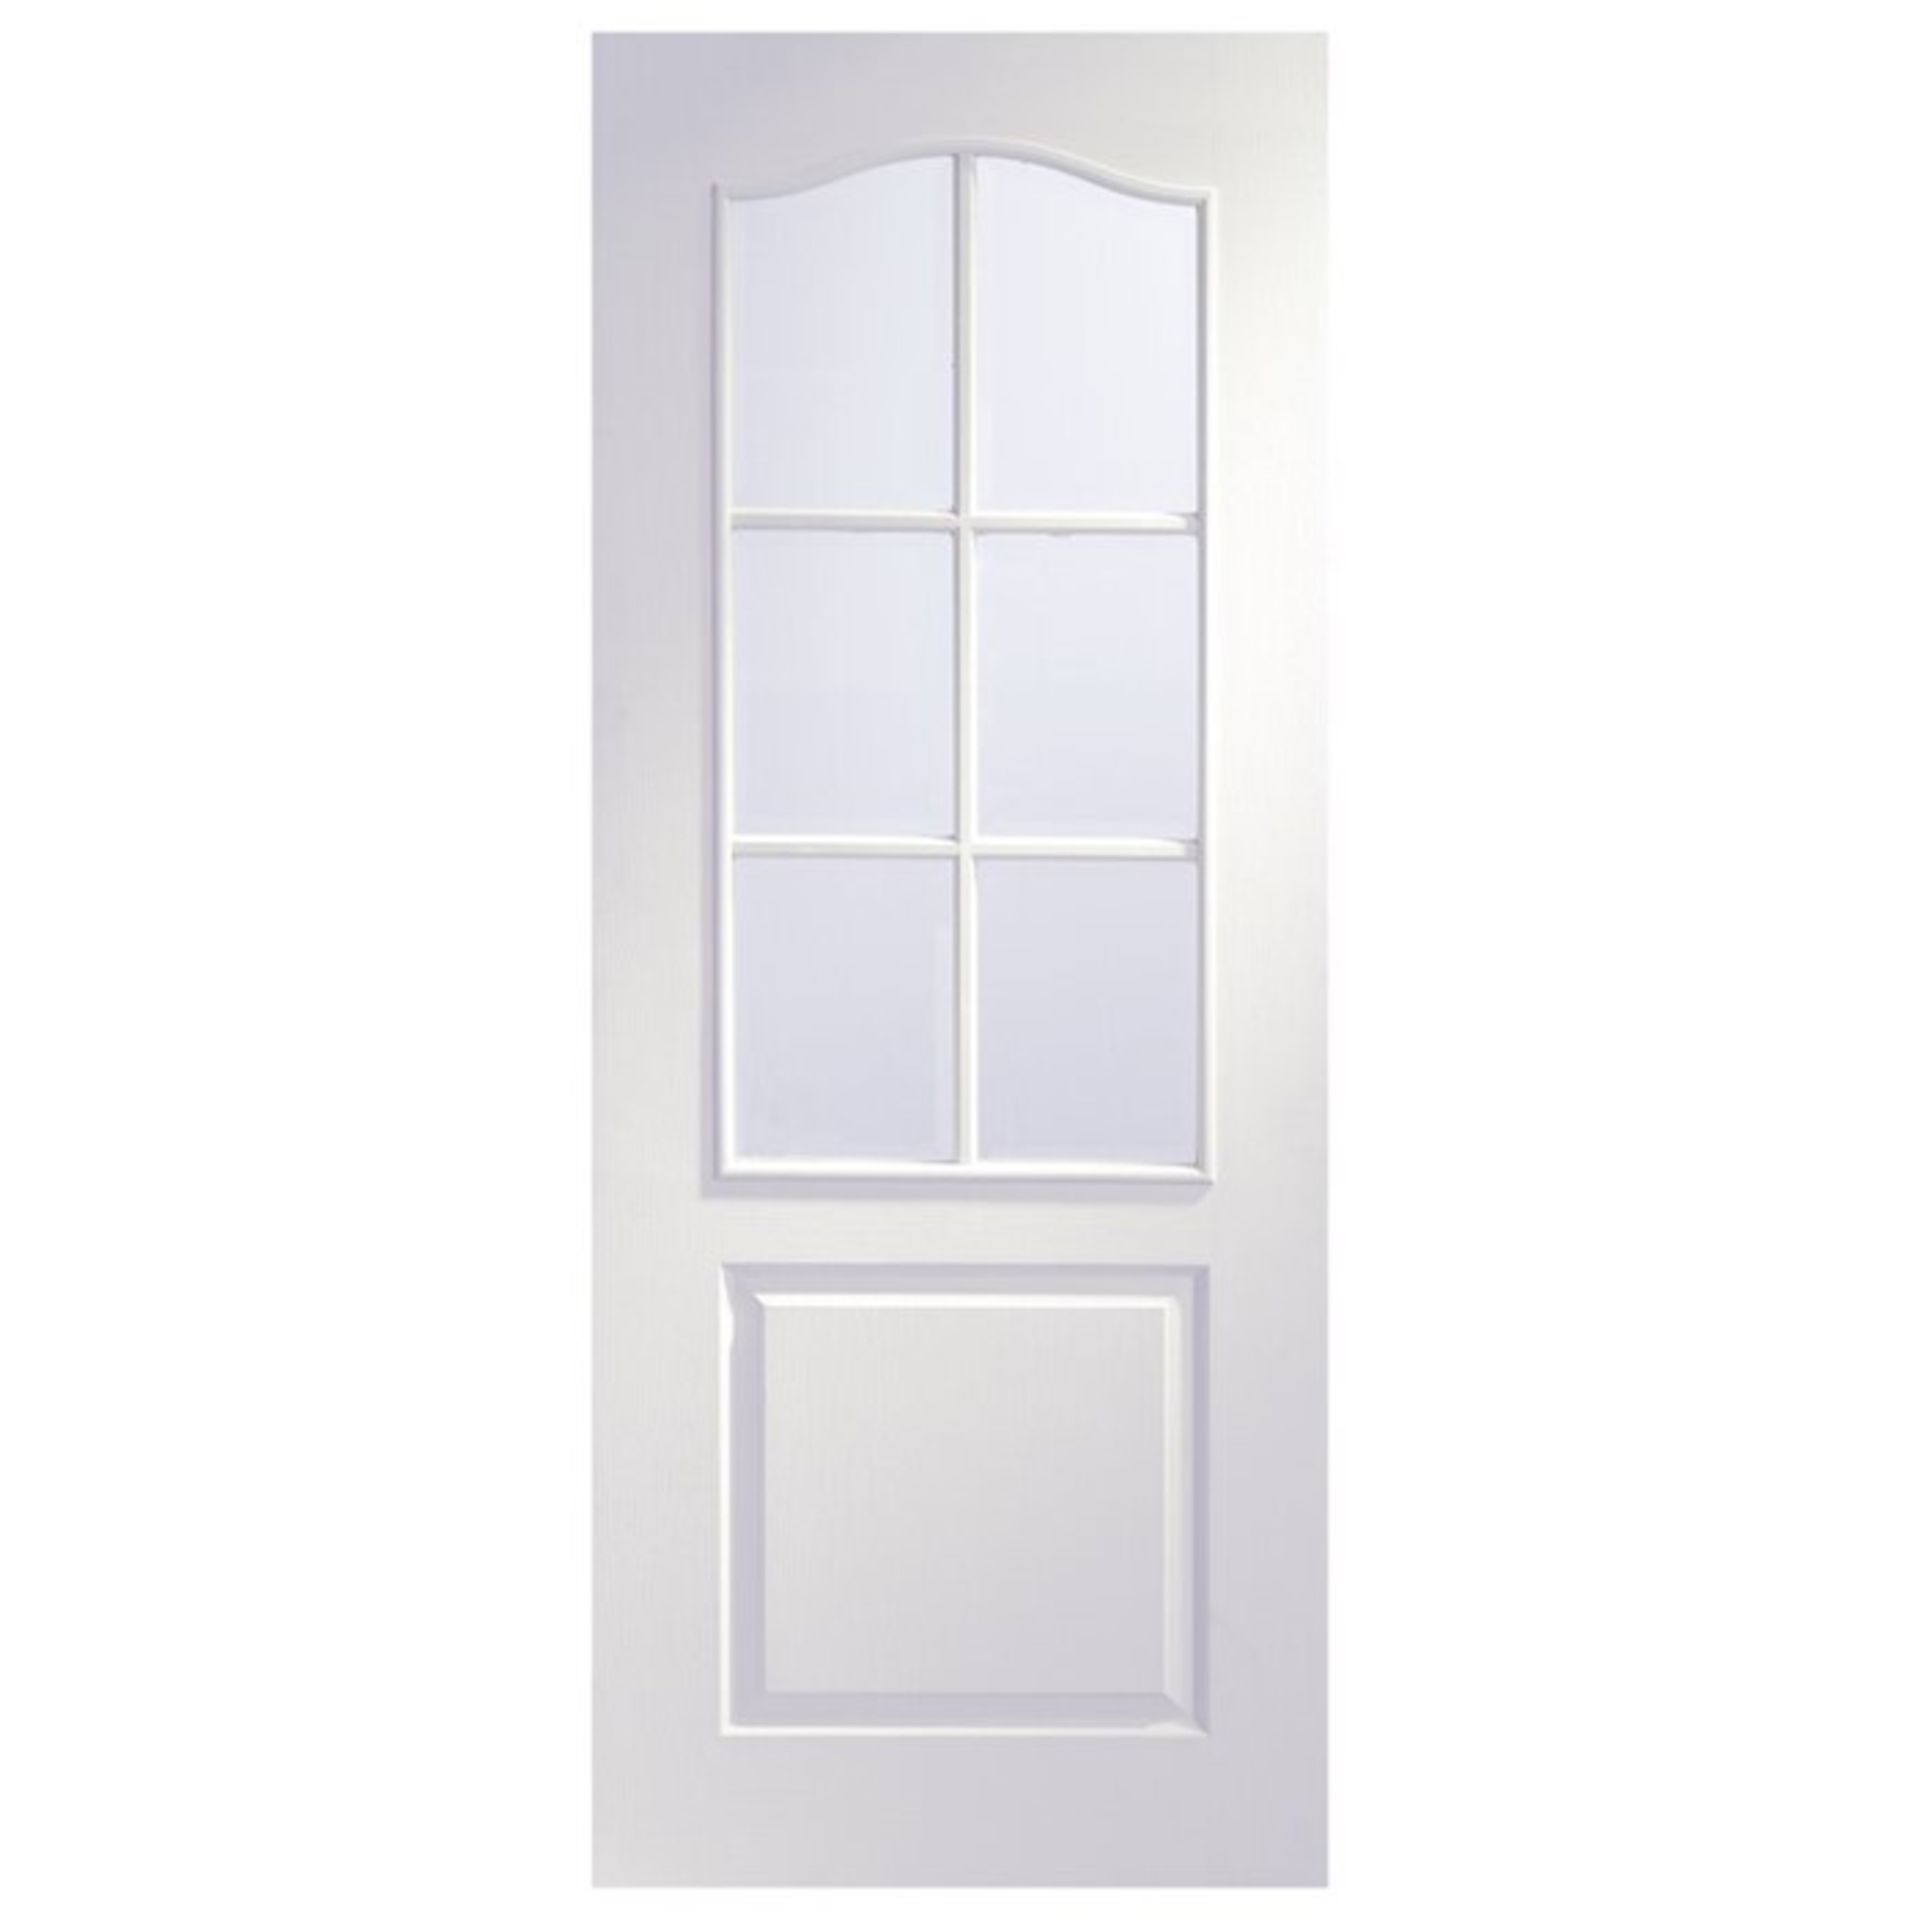 XL Joinery Limited,Classique Internal Door Unfinished RRP -£112.99(20089/6 -SDJD1414) (78 x 30 1/